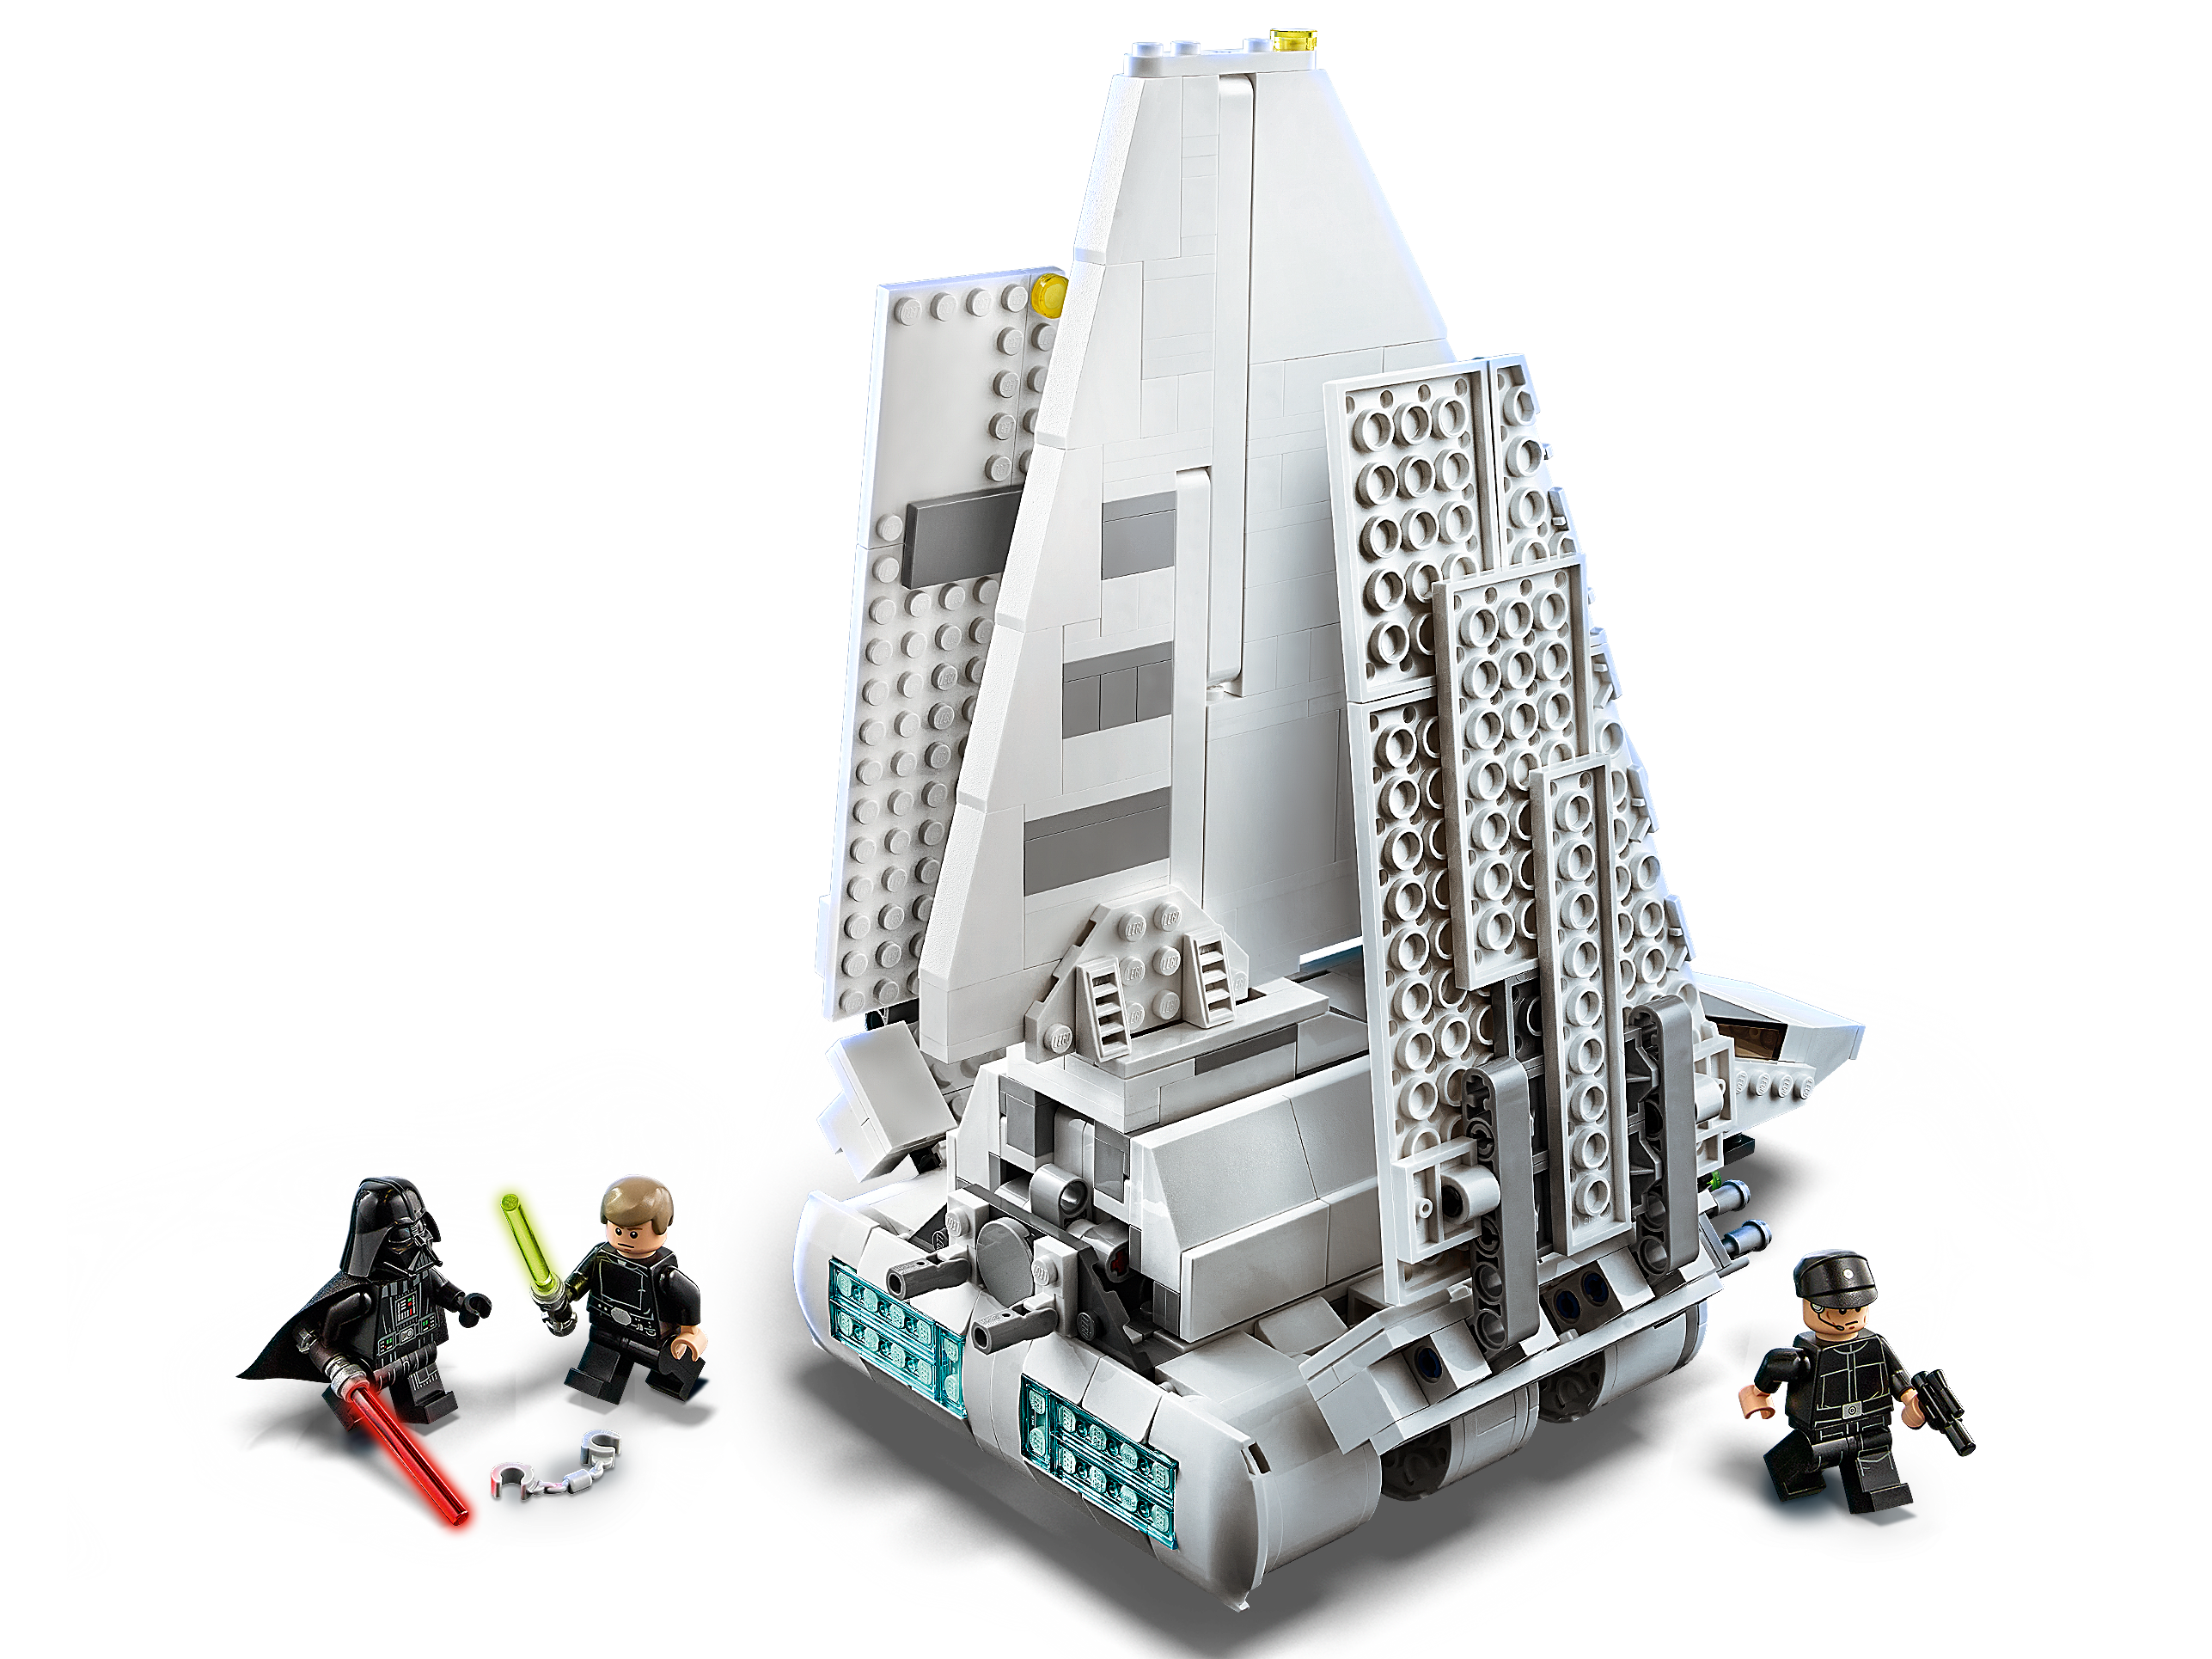 660 Pieces New 2021 LEGO Star Wars Imperial Shuttle 75302 Building Kit; Awesome Building Toy for Kids Featuring Luke Skywalker and Darth Vader; Great Gift Idea for Star Wars Fans Aged 9 and Up